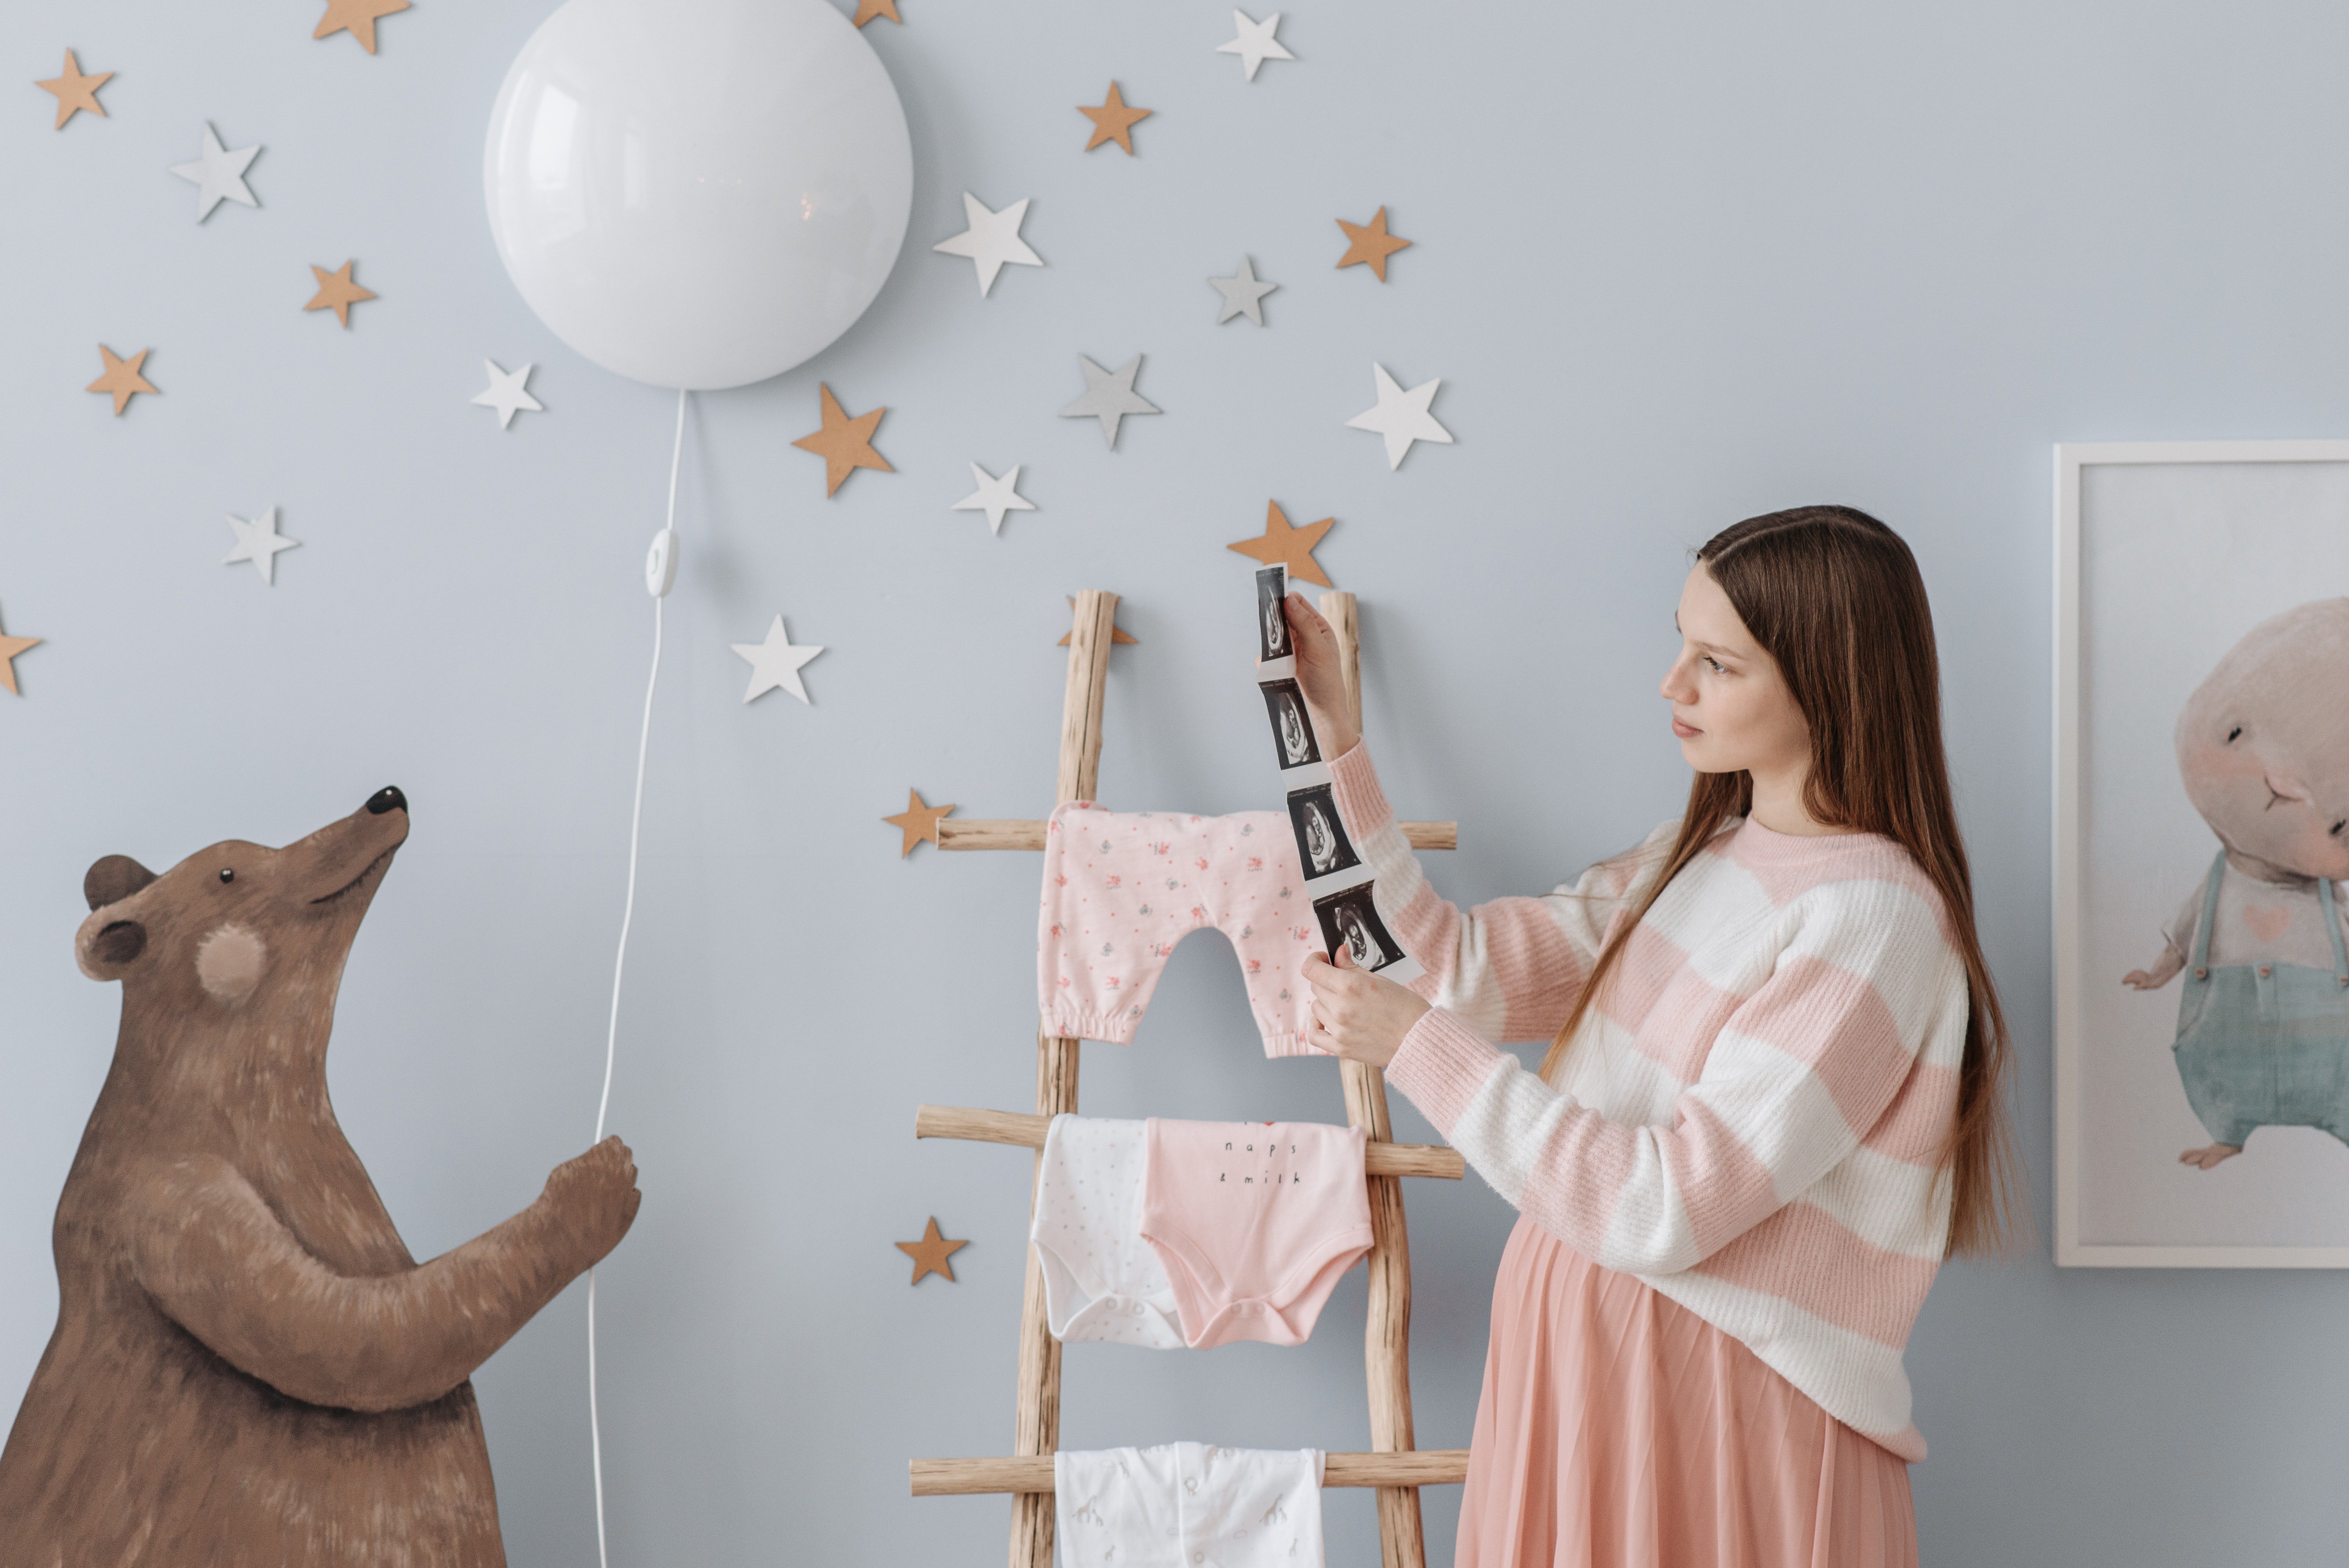 Melanie took special care to design her future baby's room. | Source: Pexels